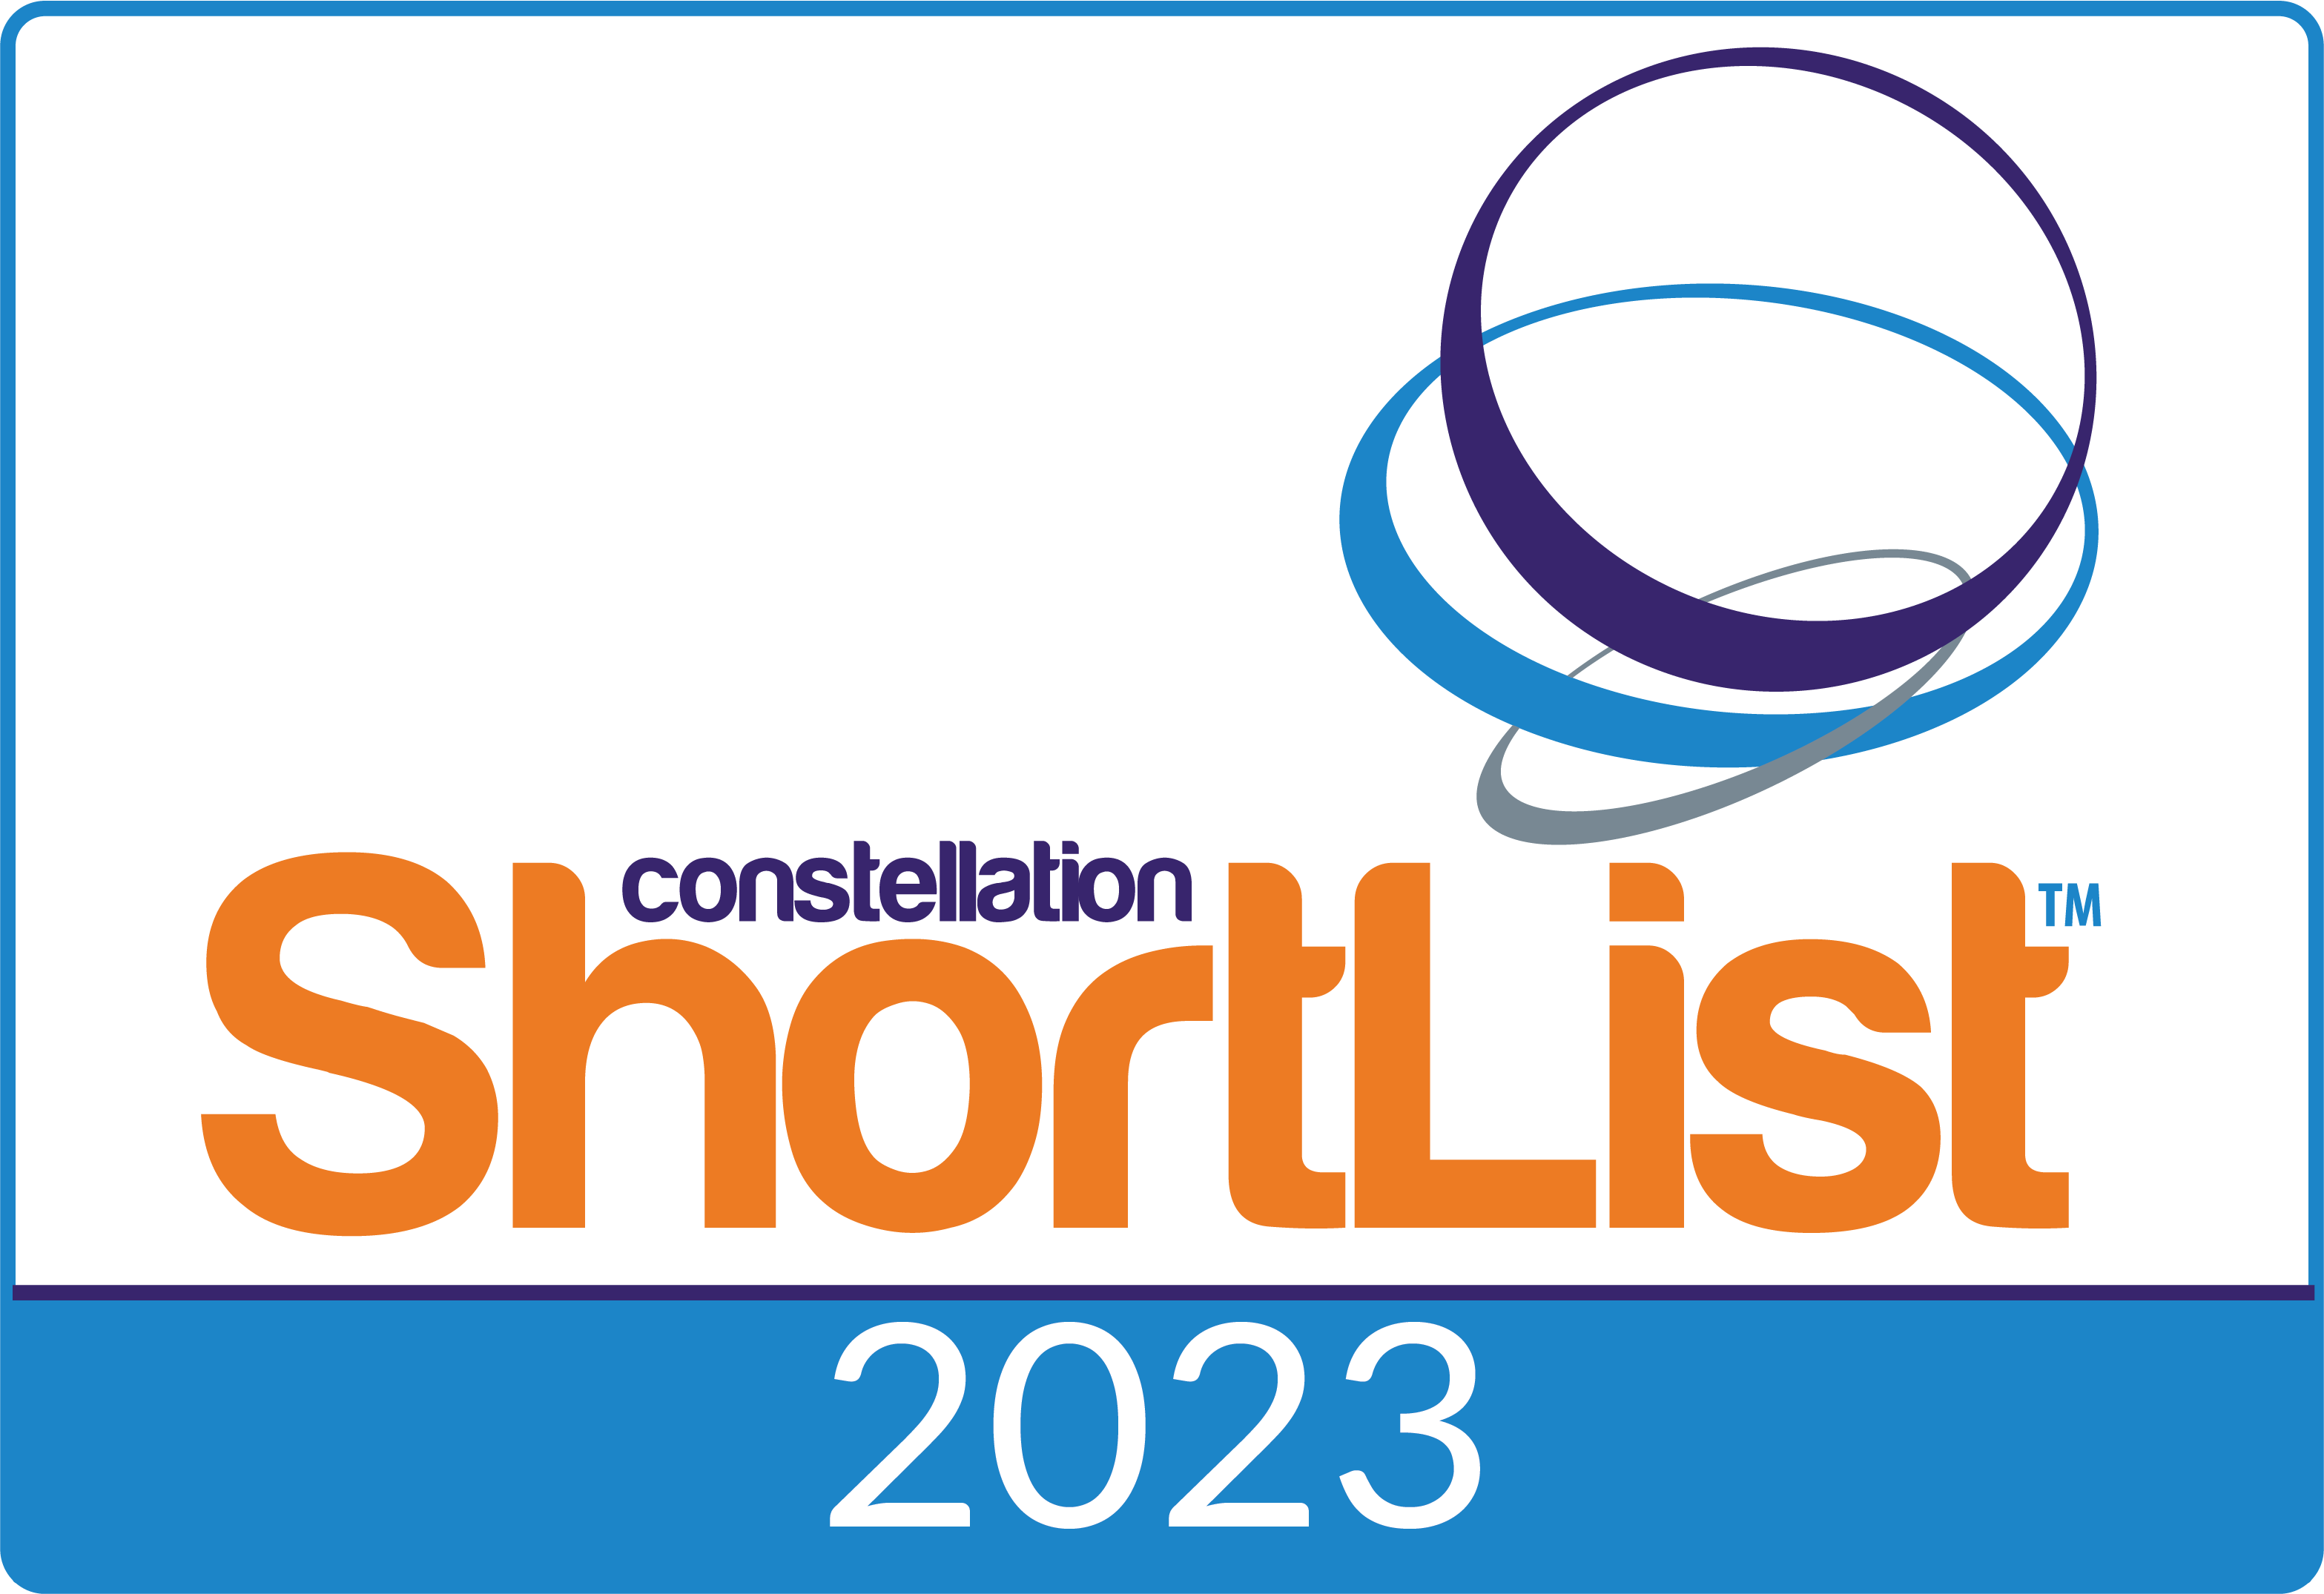 Wipro Recognized on Constellation ShortList™ for Global AI (Artificial Intelligence) Services